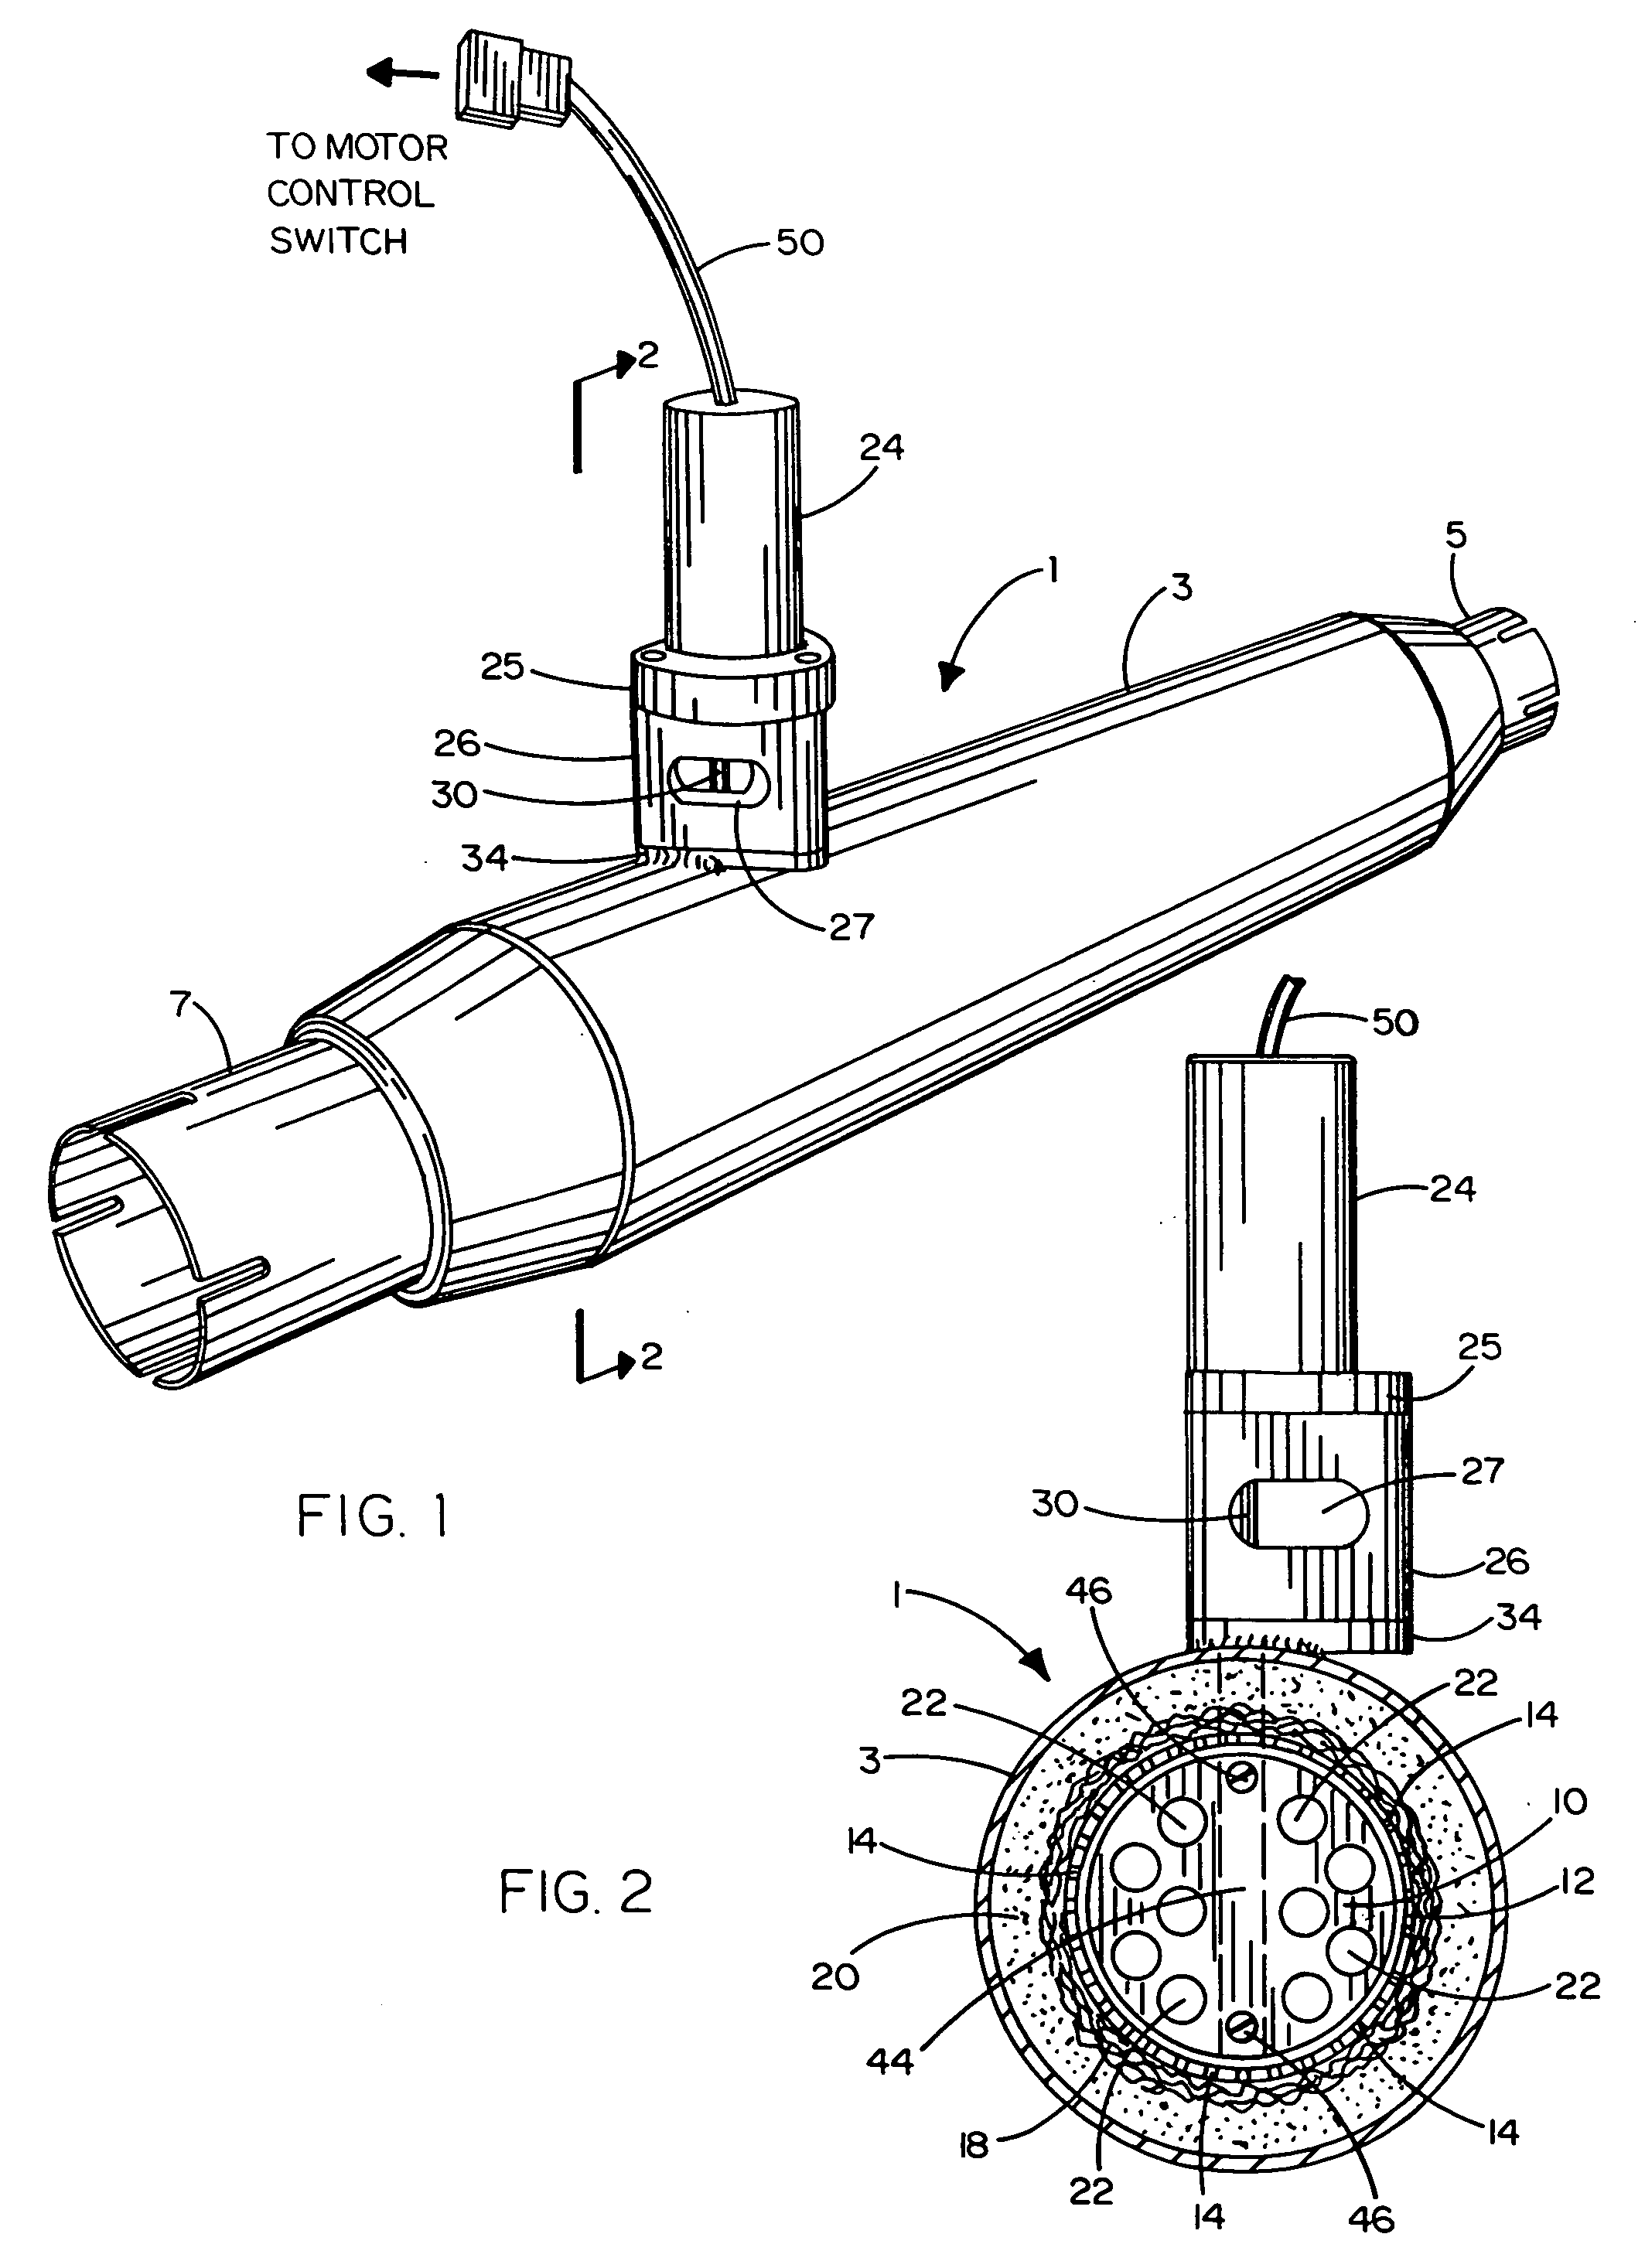 Muffler having adjustable butterfly valve for improved sound attenuation and engine performance